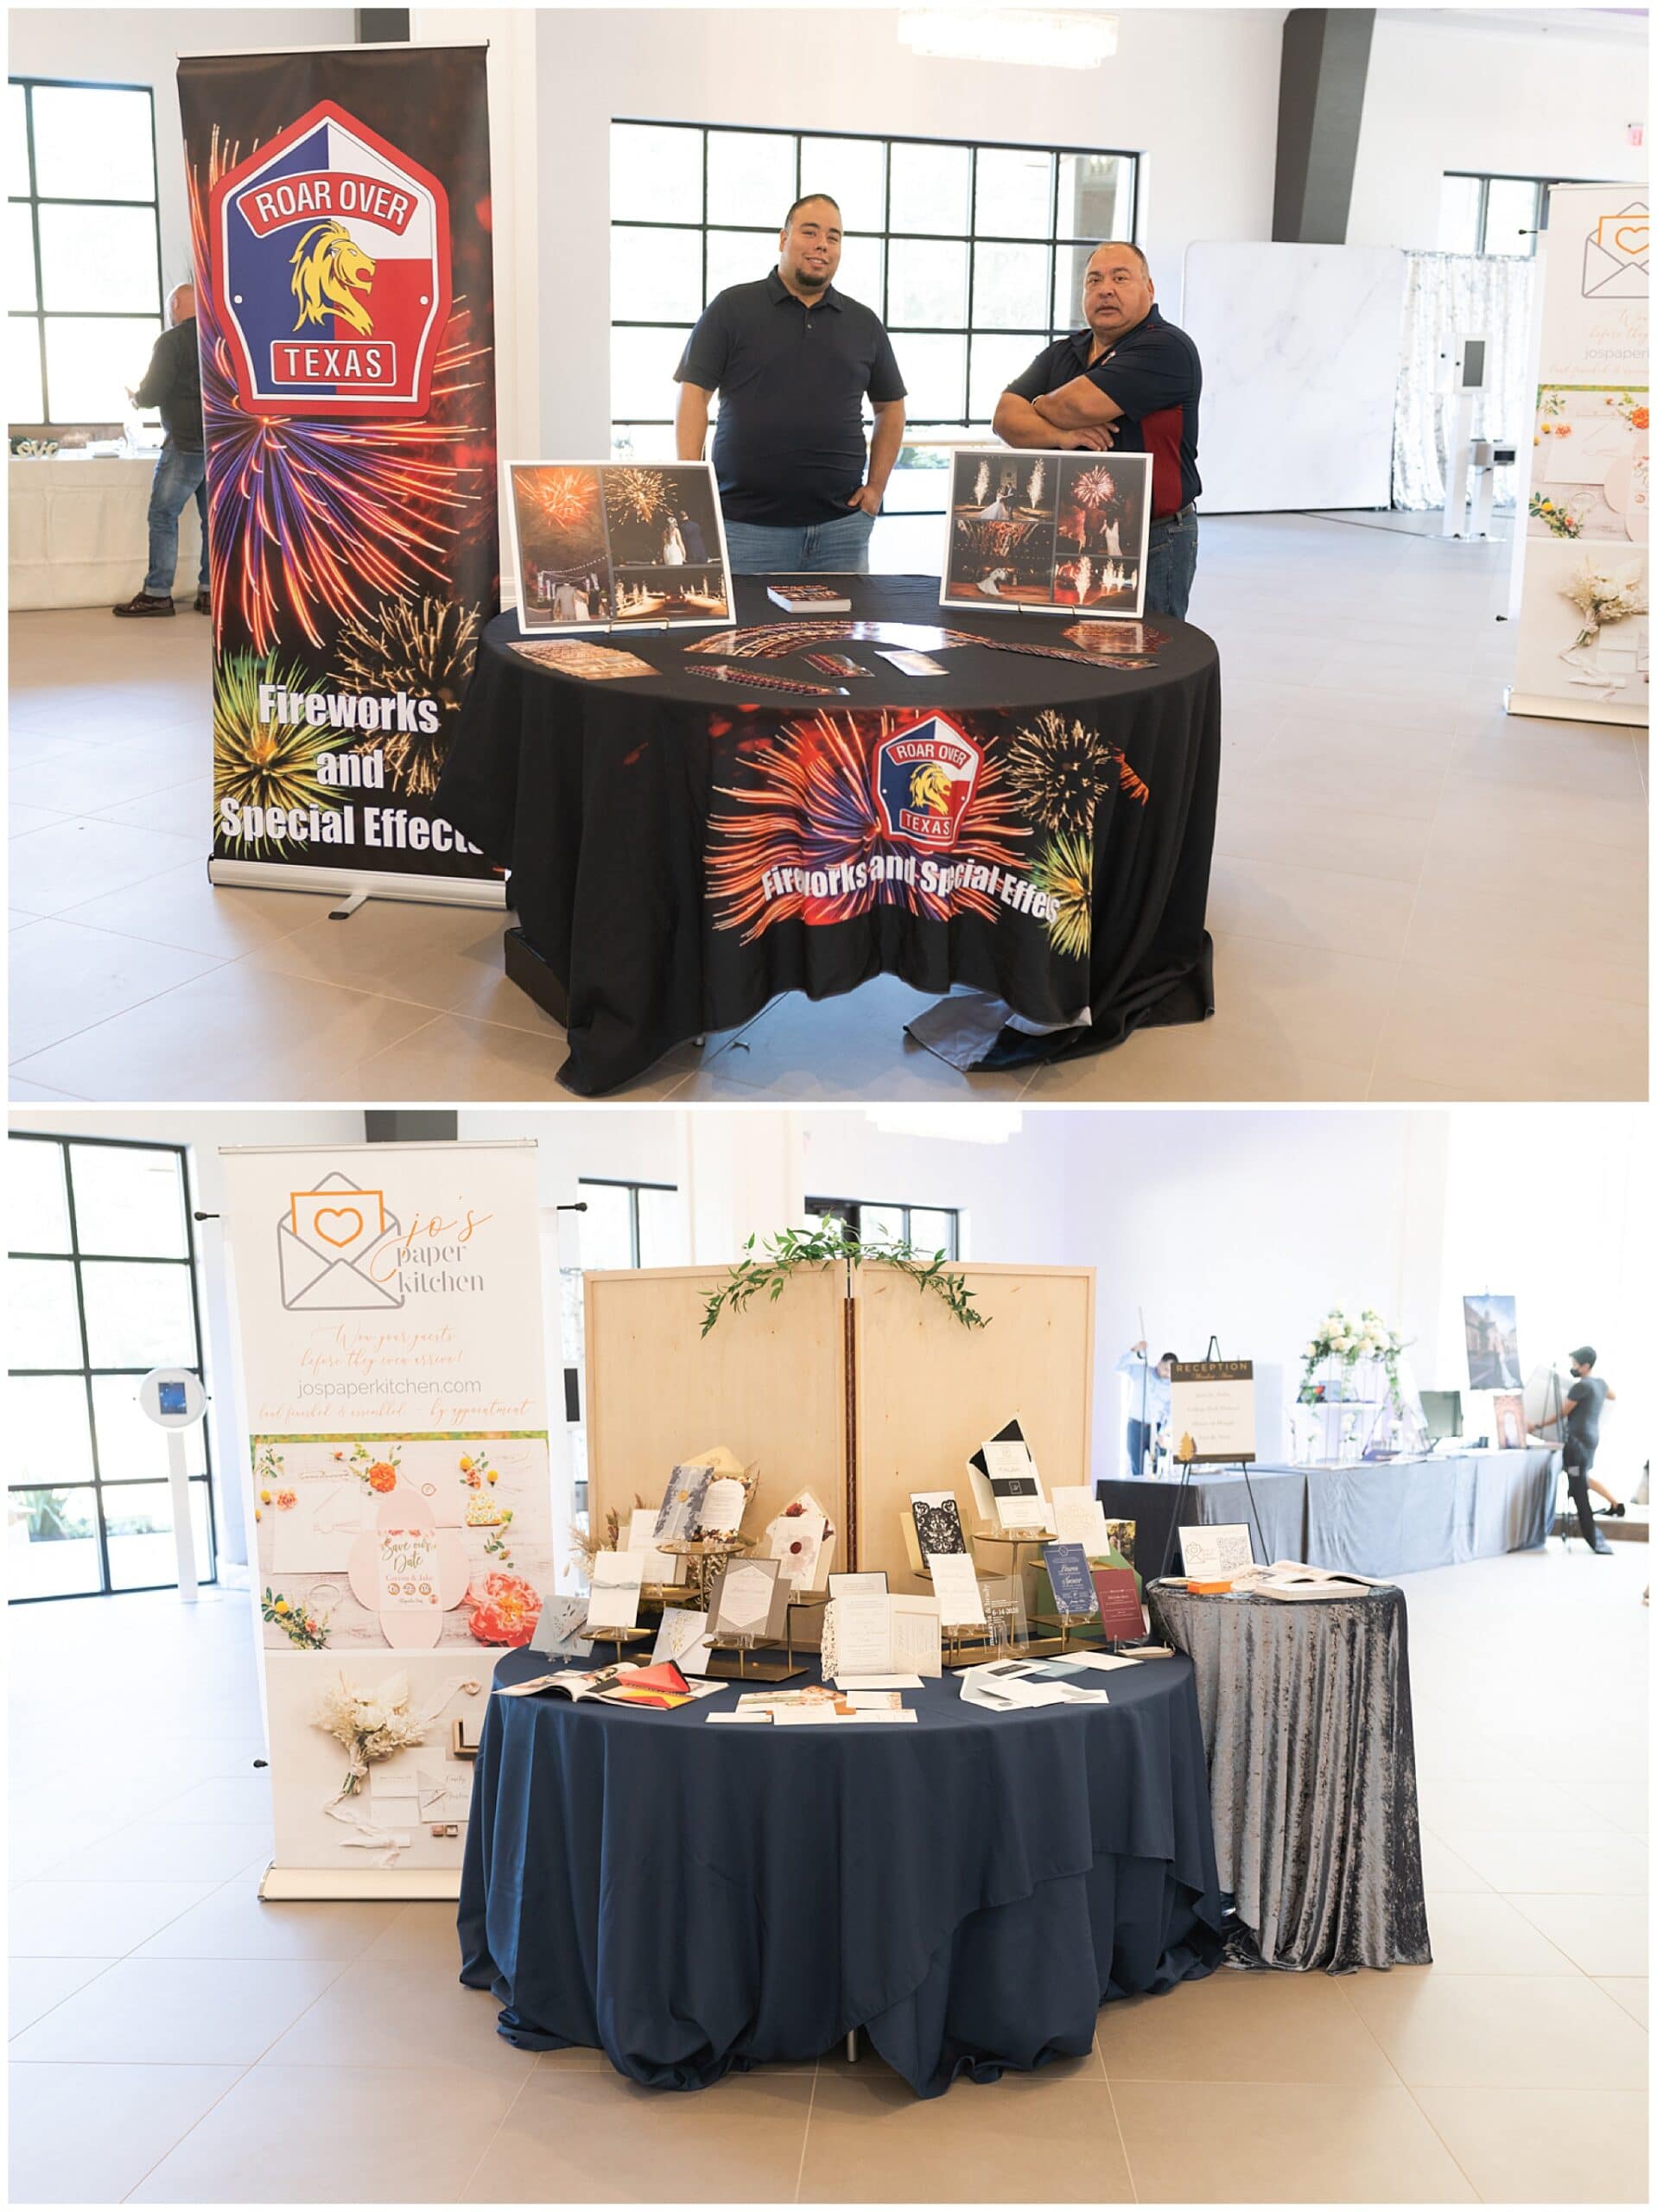 The Luminaire Houston wedding venue at their open house vendor tables captured by Swish and Click Photography